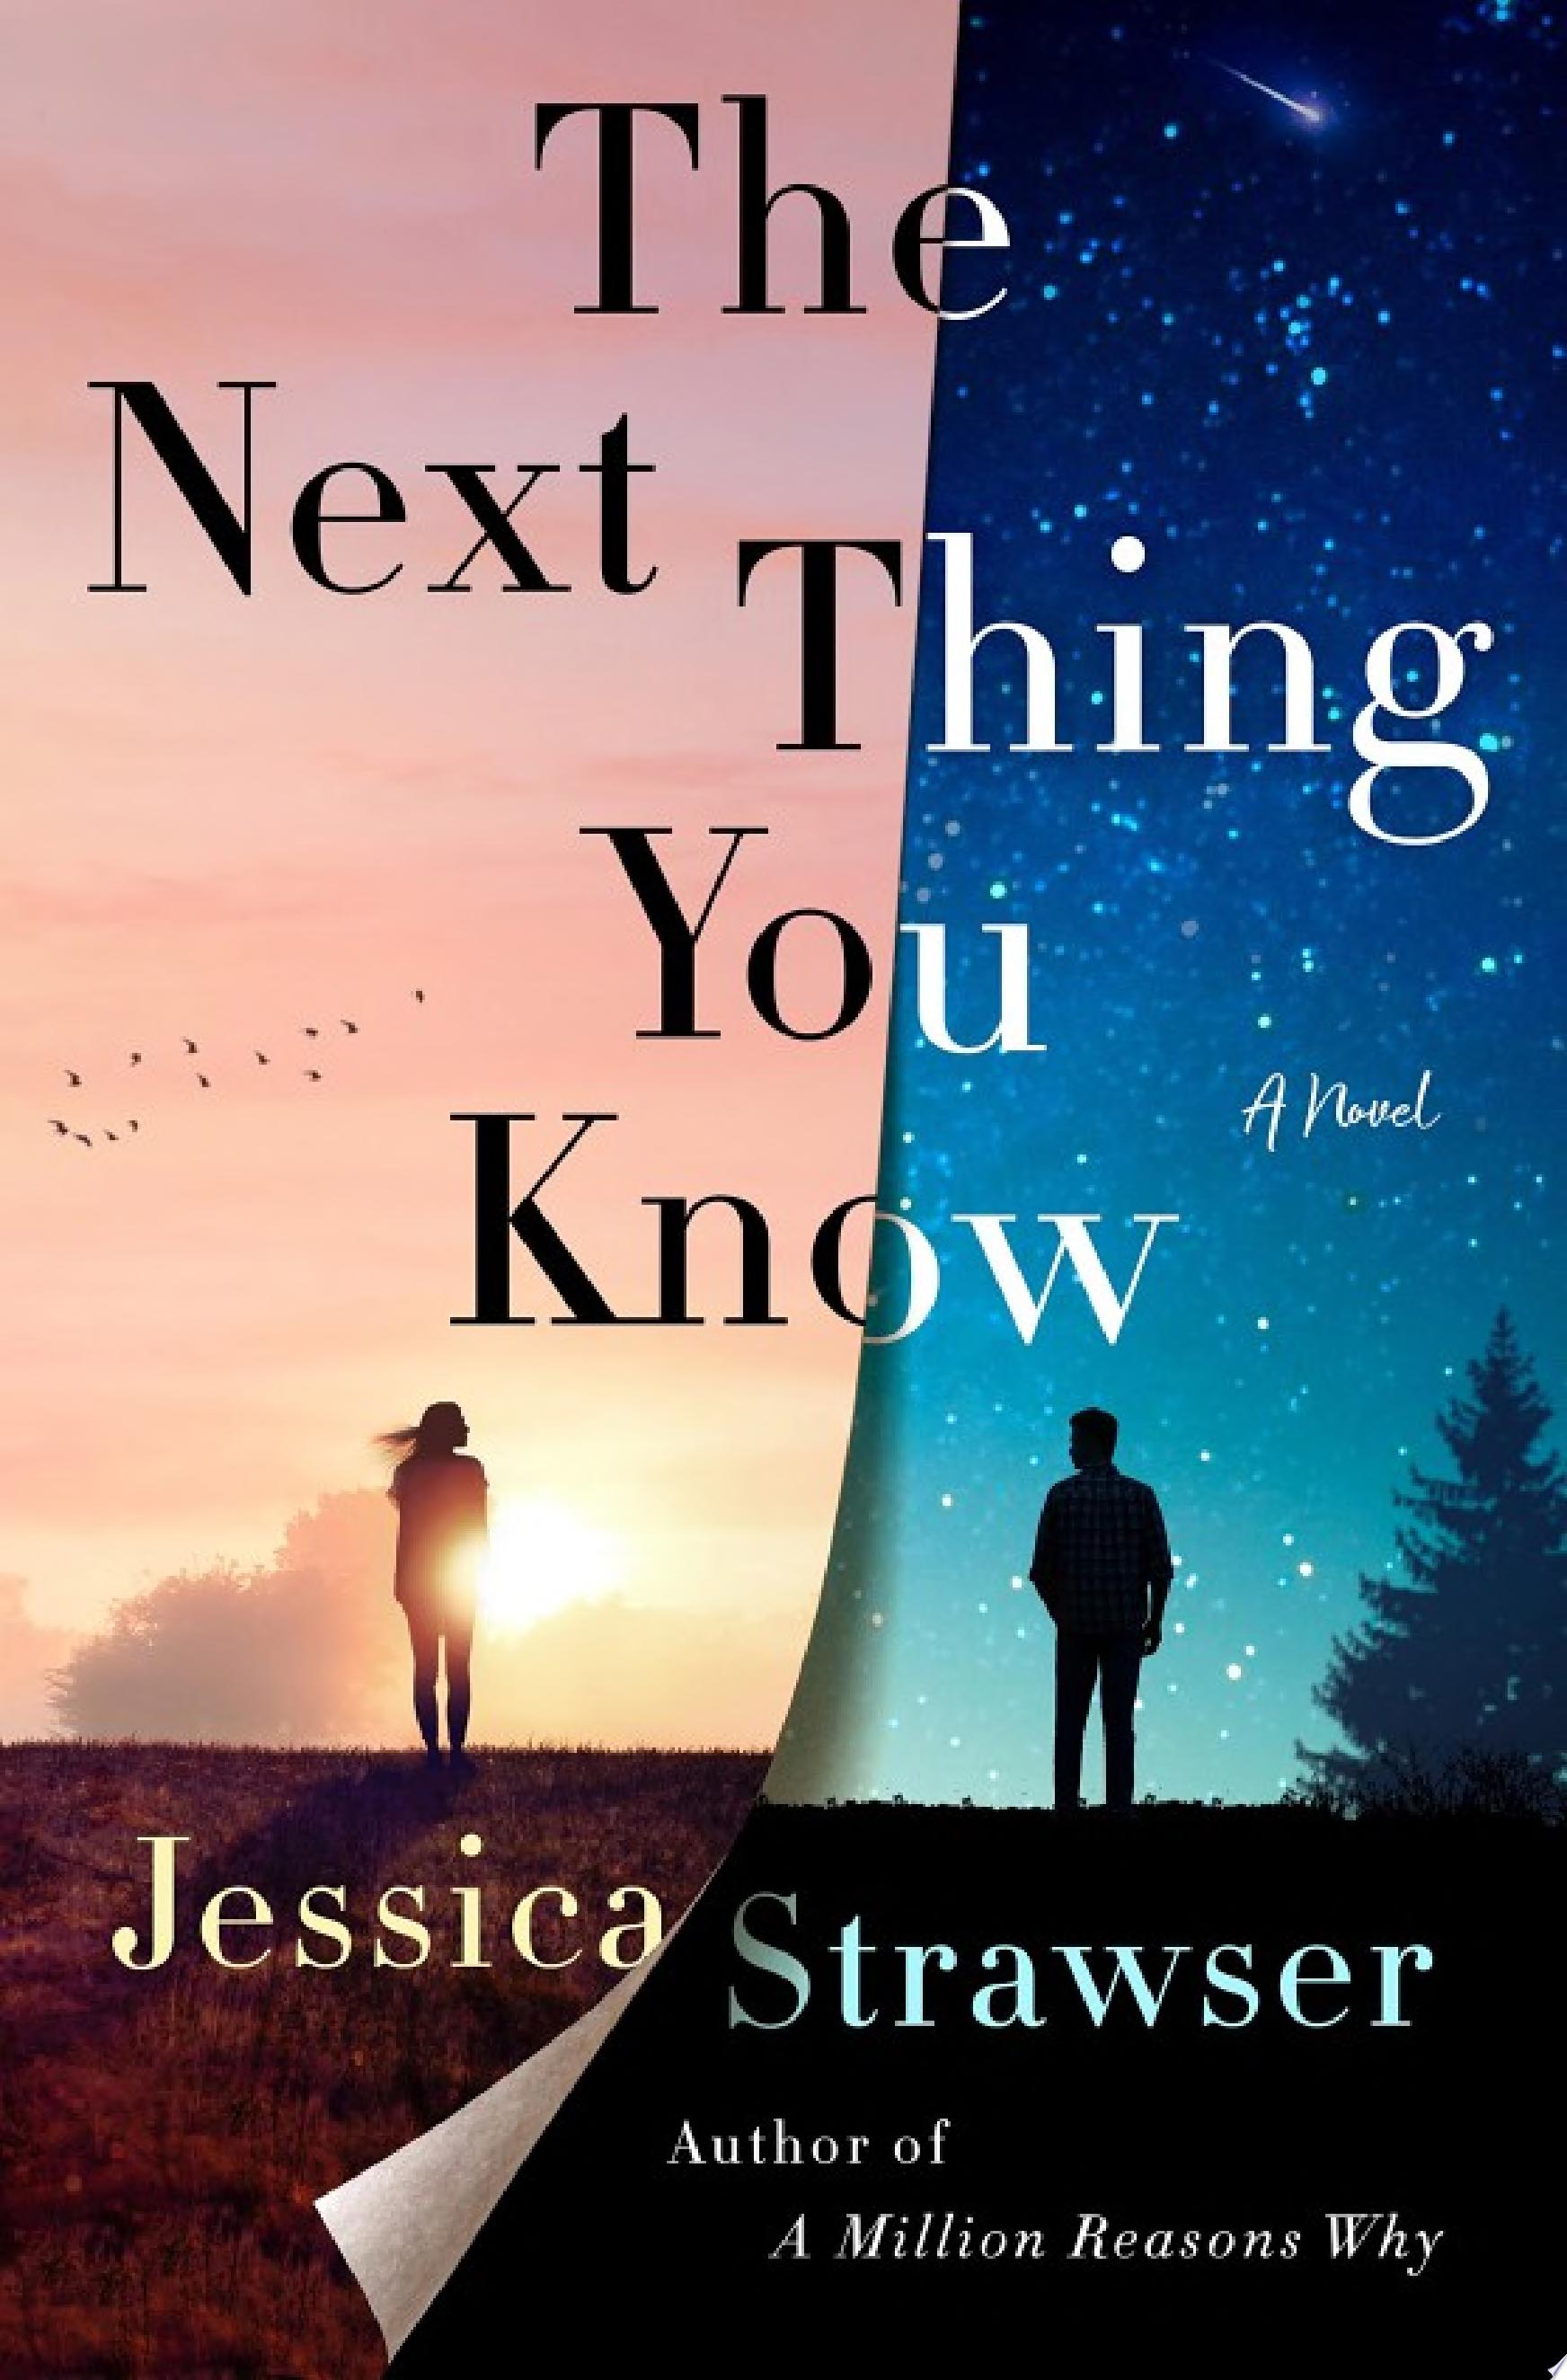 Image for "The Next Thing You Know"